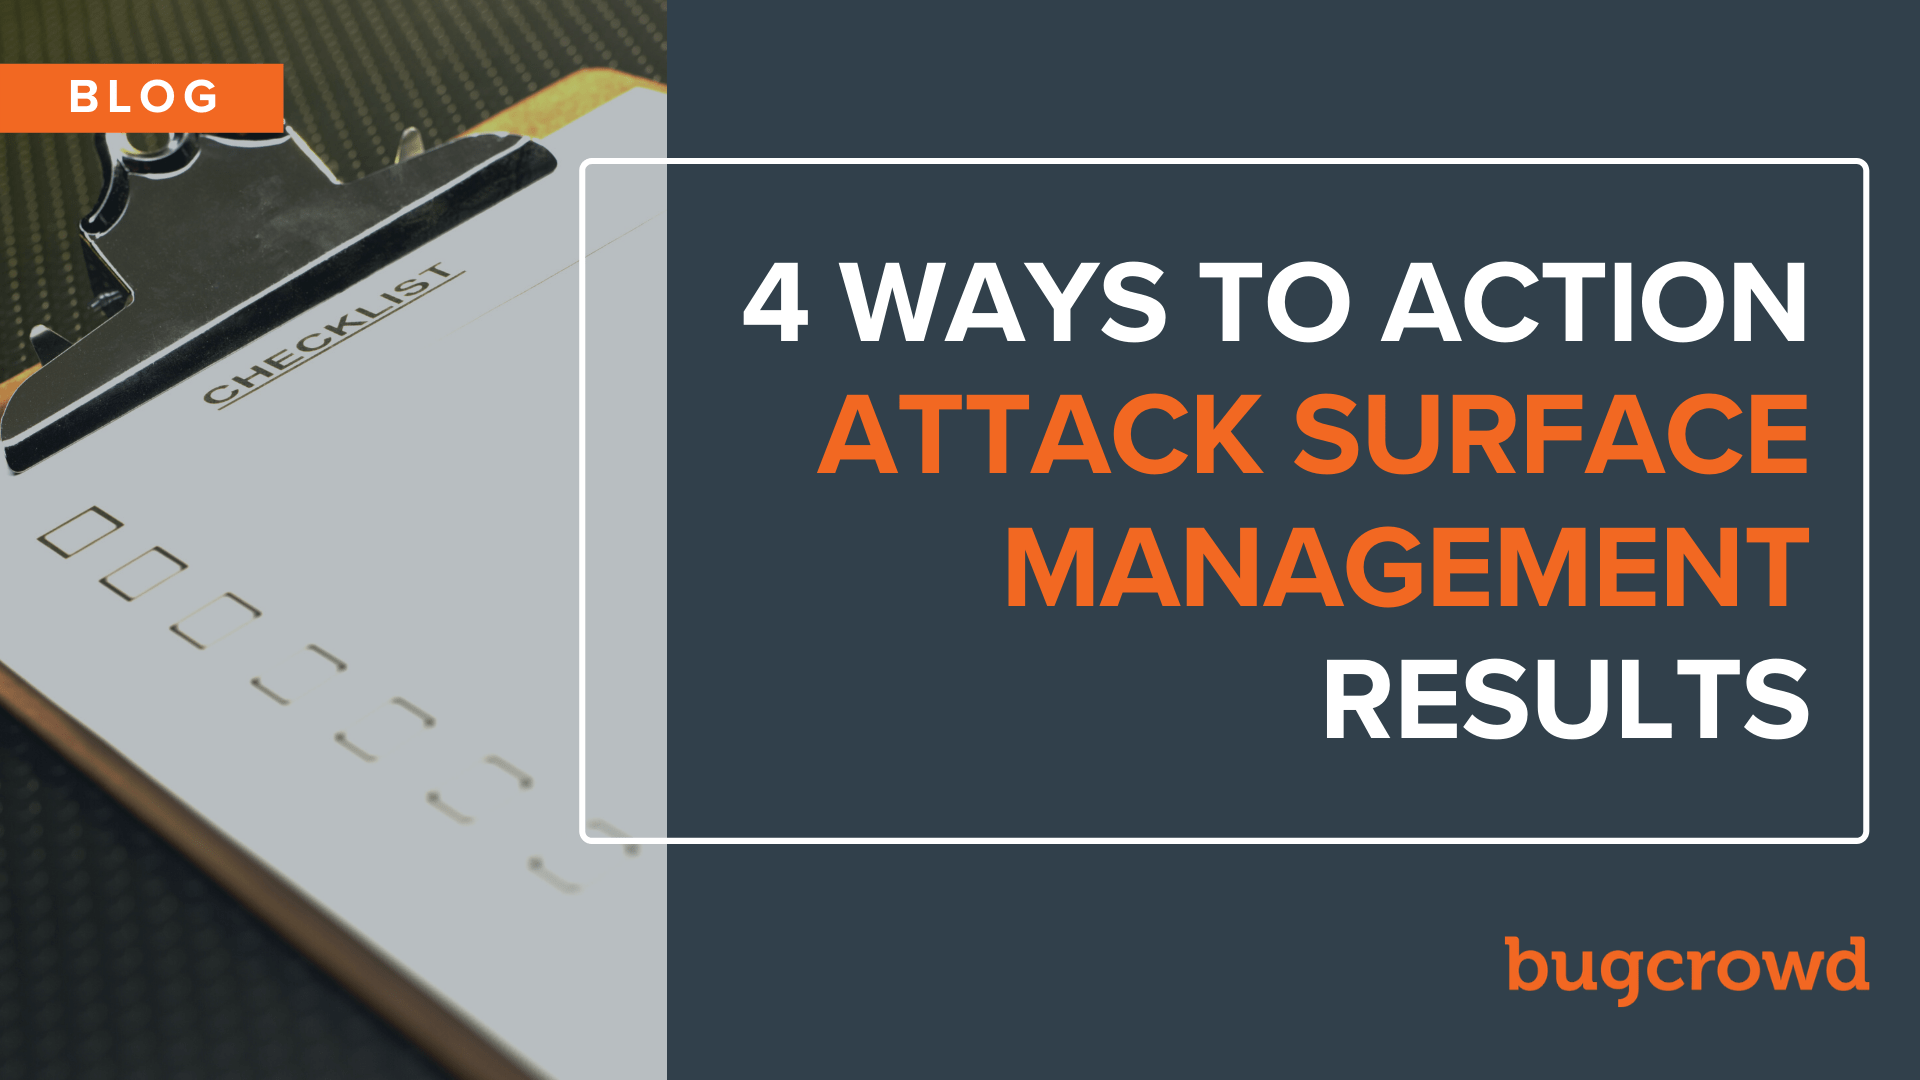 4 Ways to Action Attack Surface Management Results